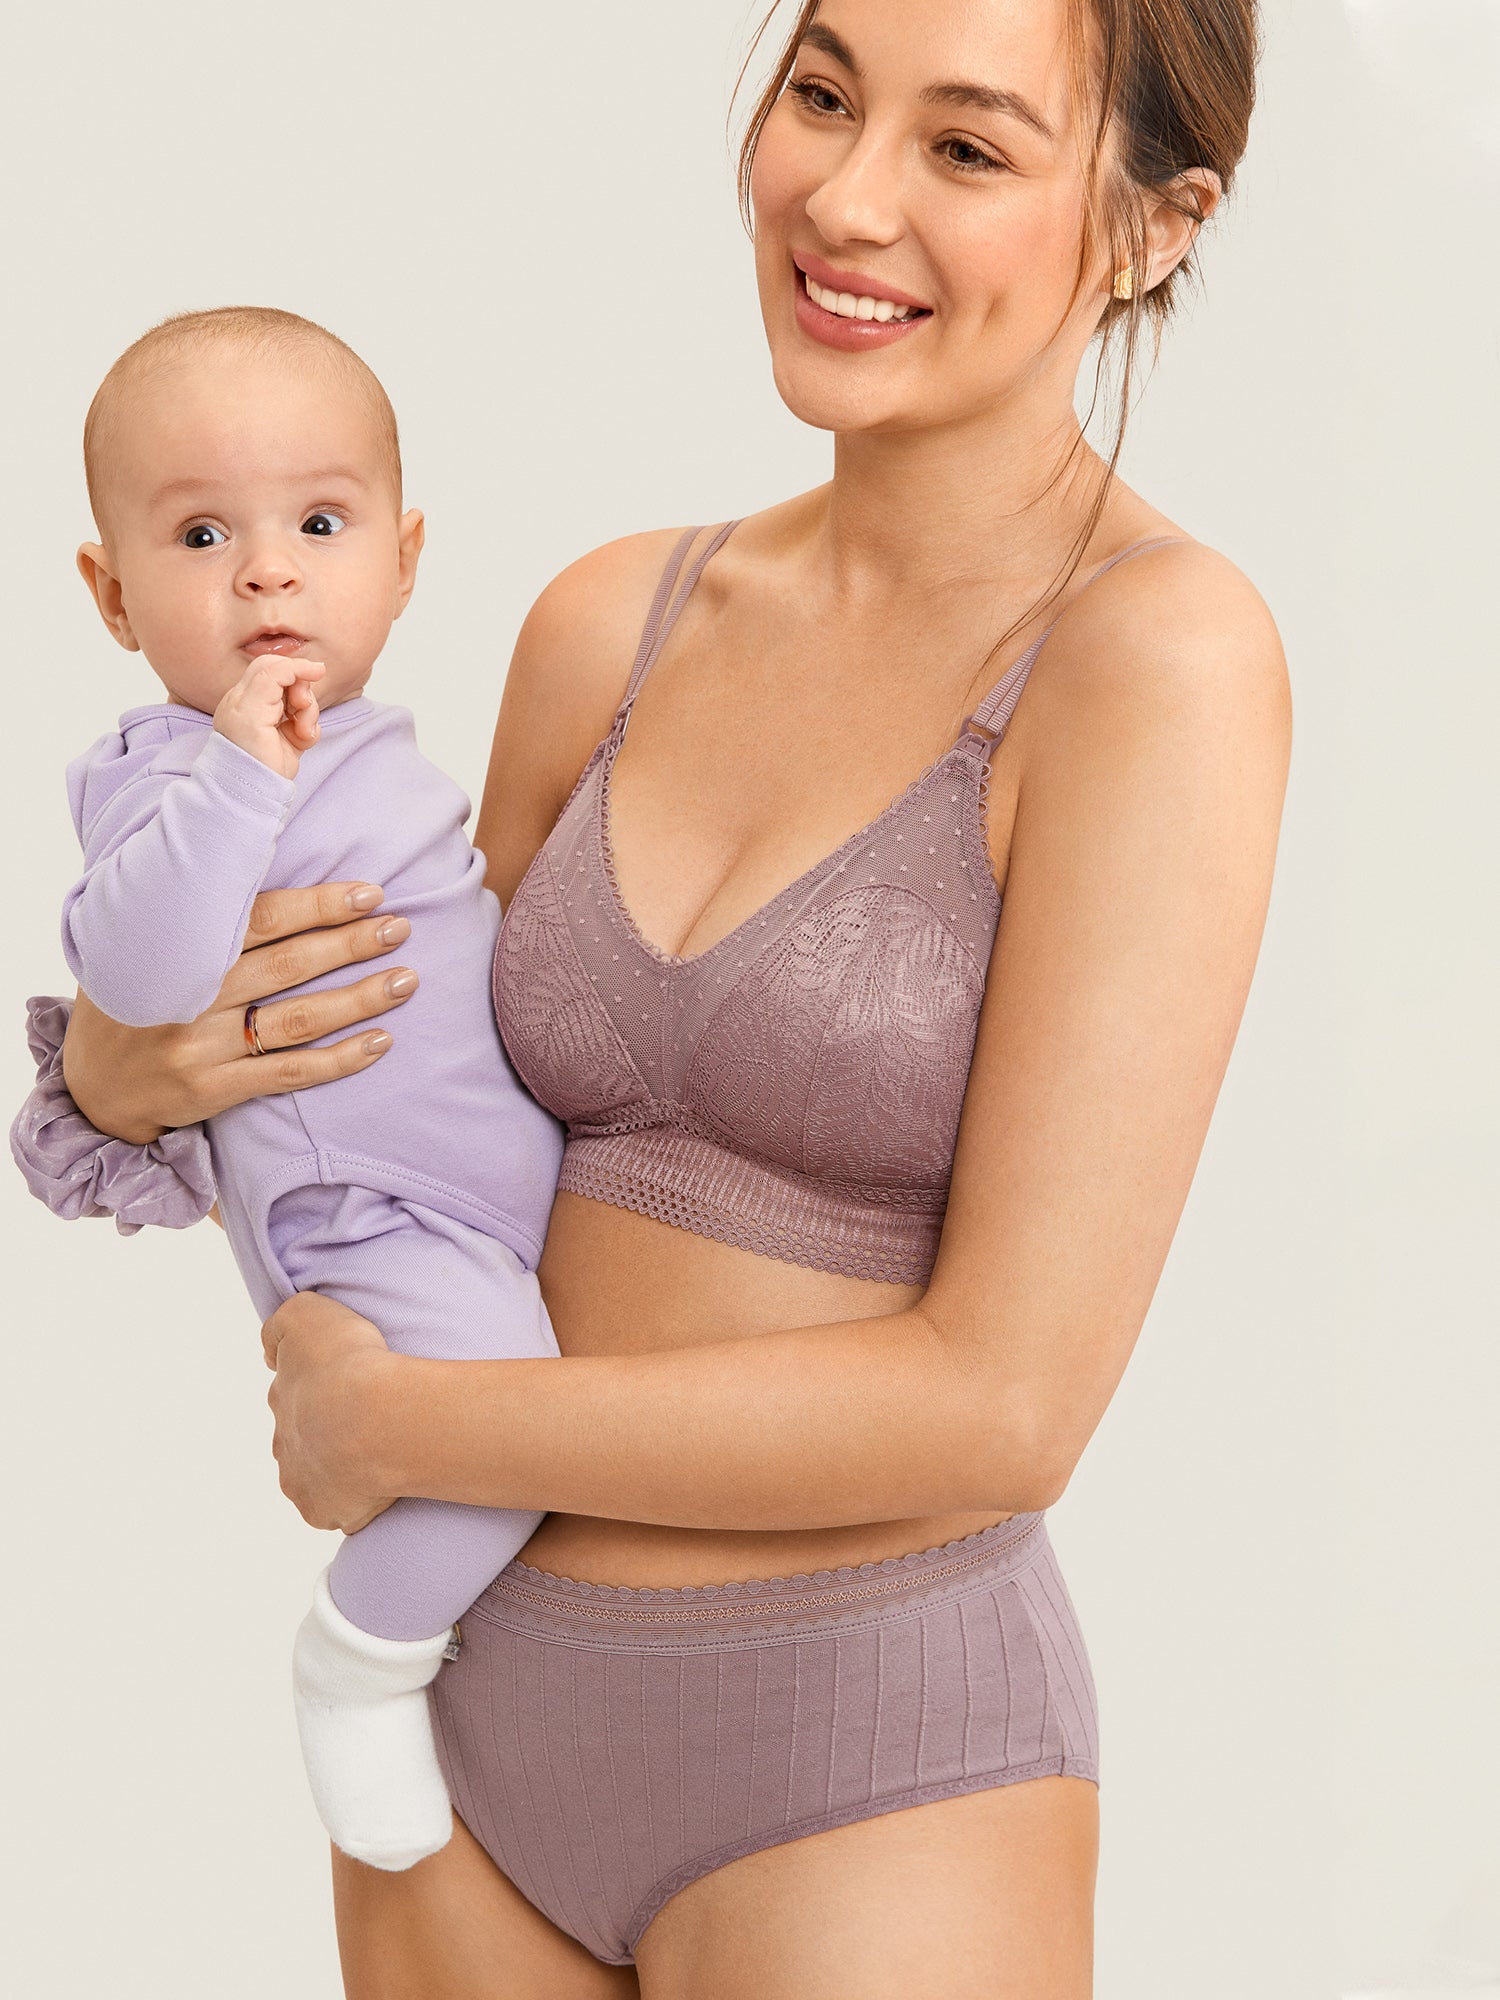 Danek Baby And Mums shop on Instagram: Padded nursing bra. Feel confident  and comfortable during breastfeeding with our padded nursing bras. Price  Ksh 499. Find us at: PLATINUM PLAZA SHOP S17 and